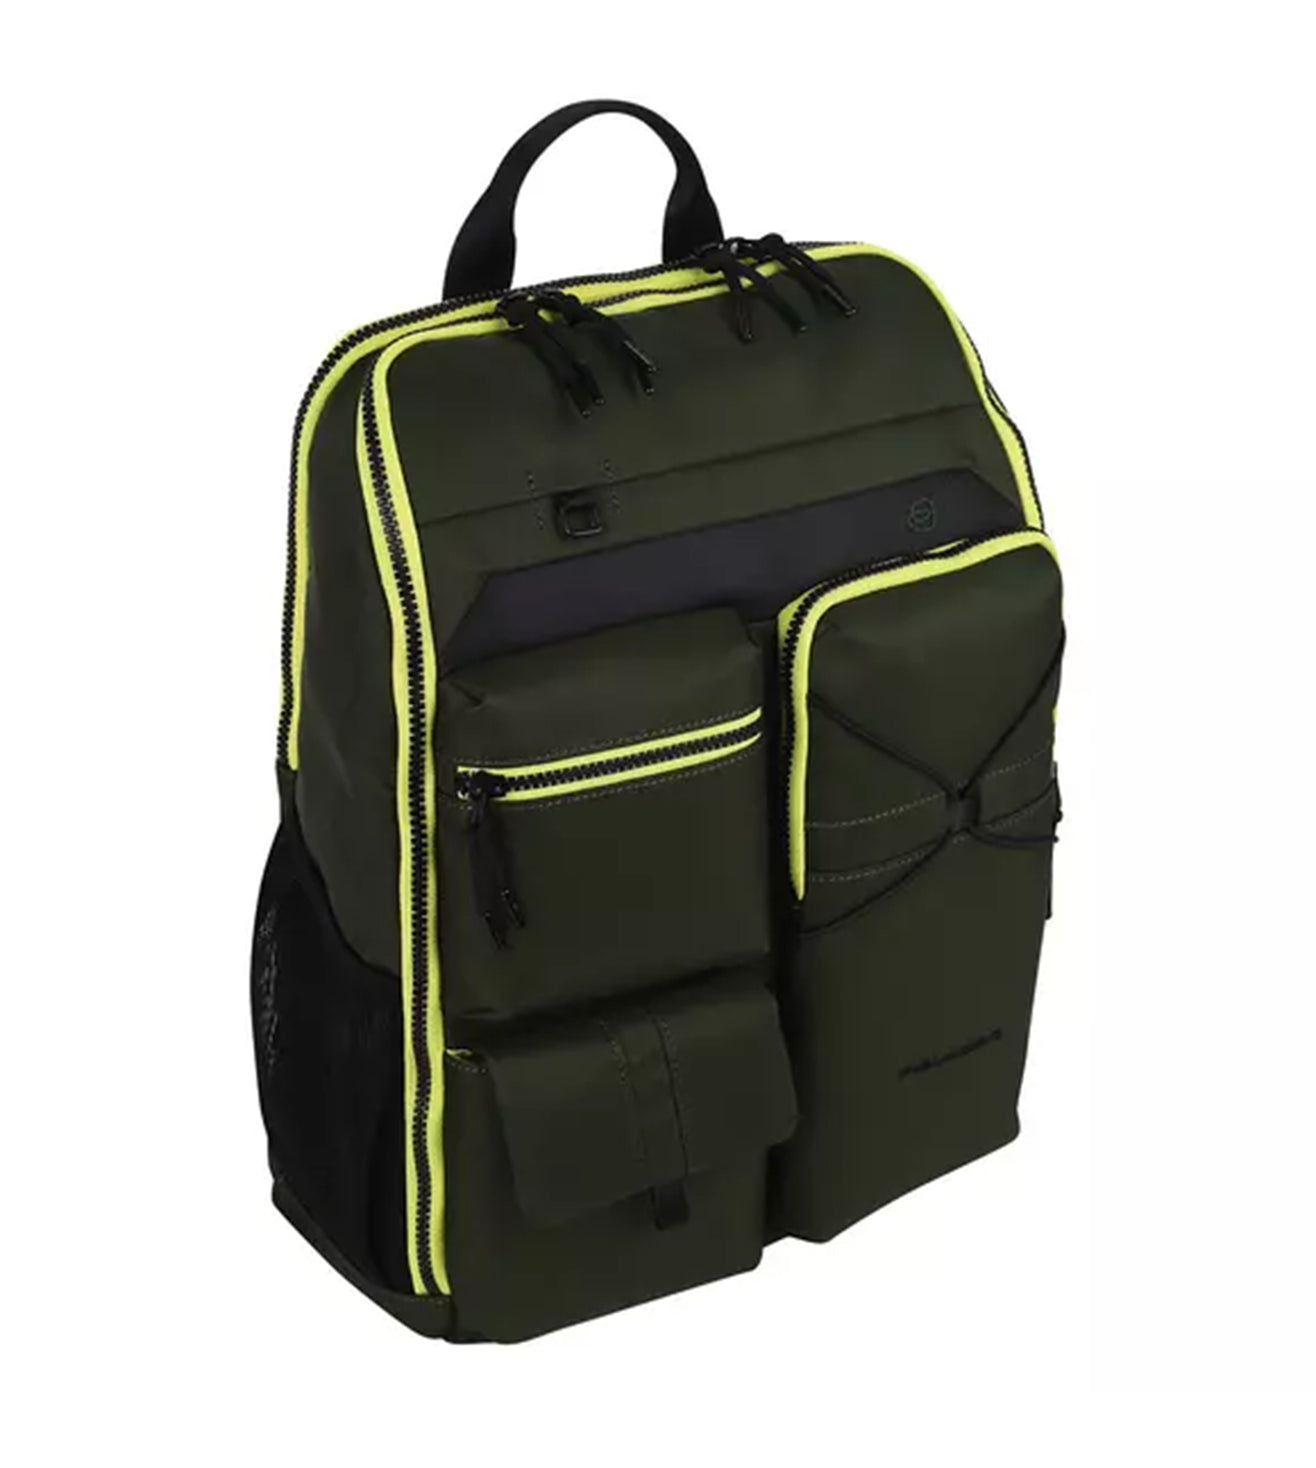 Piquadro Otello Recycled Fabric Laptop Backpack Verde